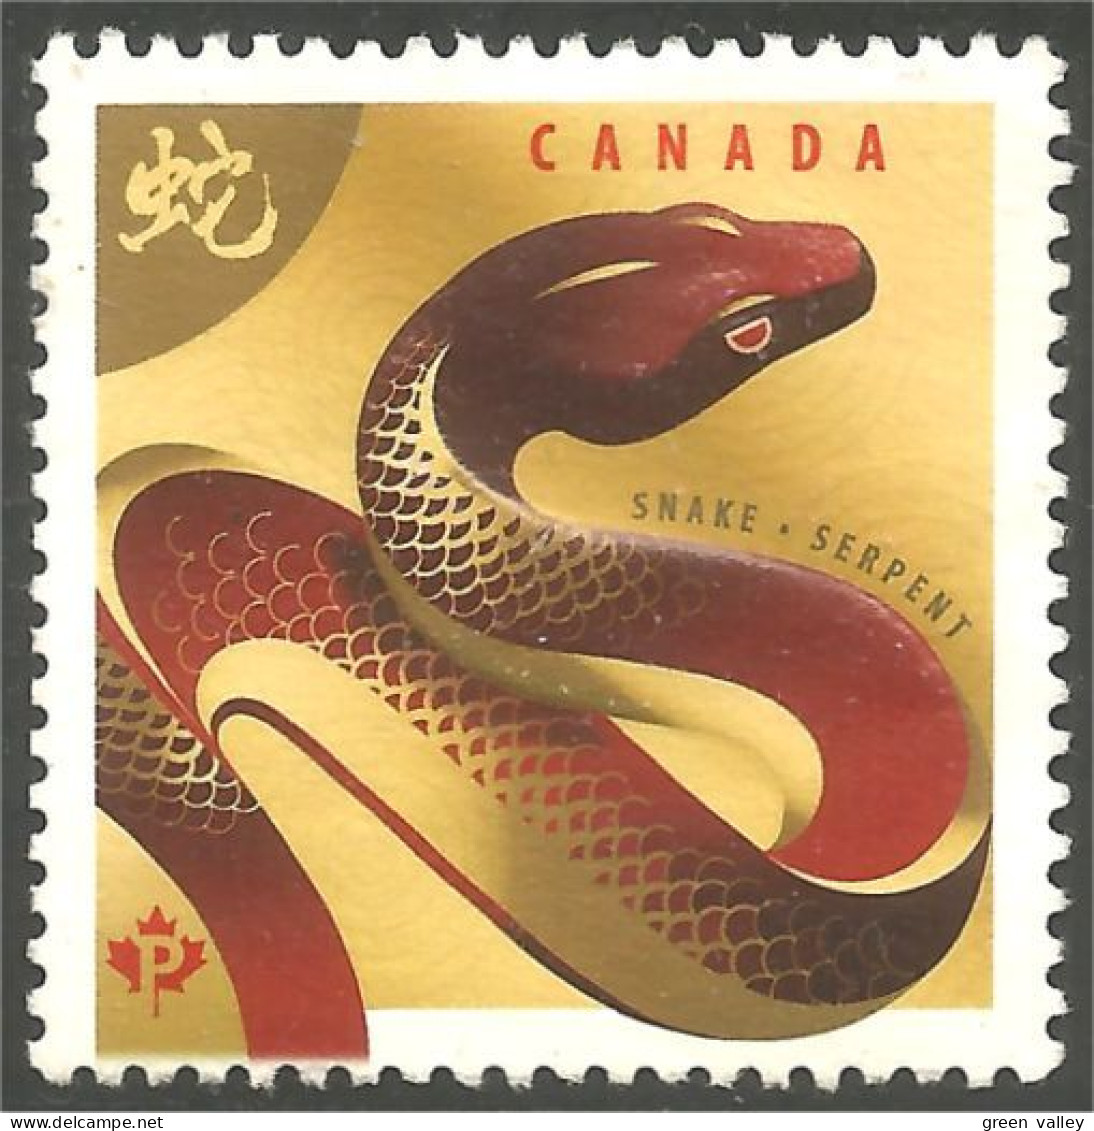 Canada Reptile Sepent Snake Année Chinoise Chinese Year Mint No Gum (348) - Serpents